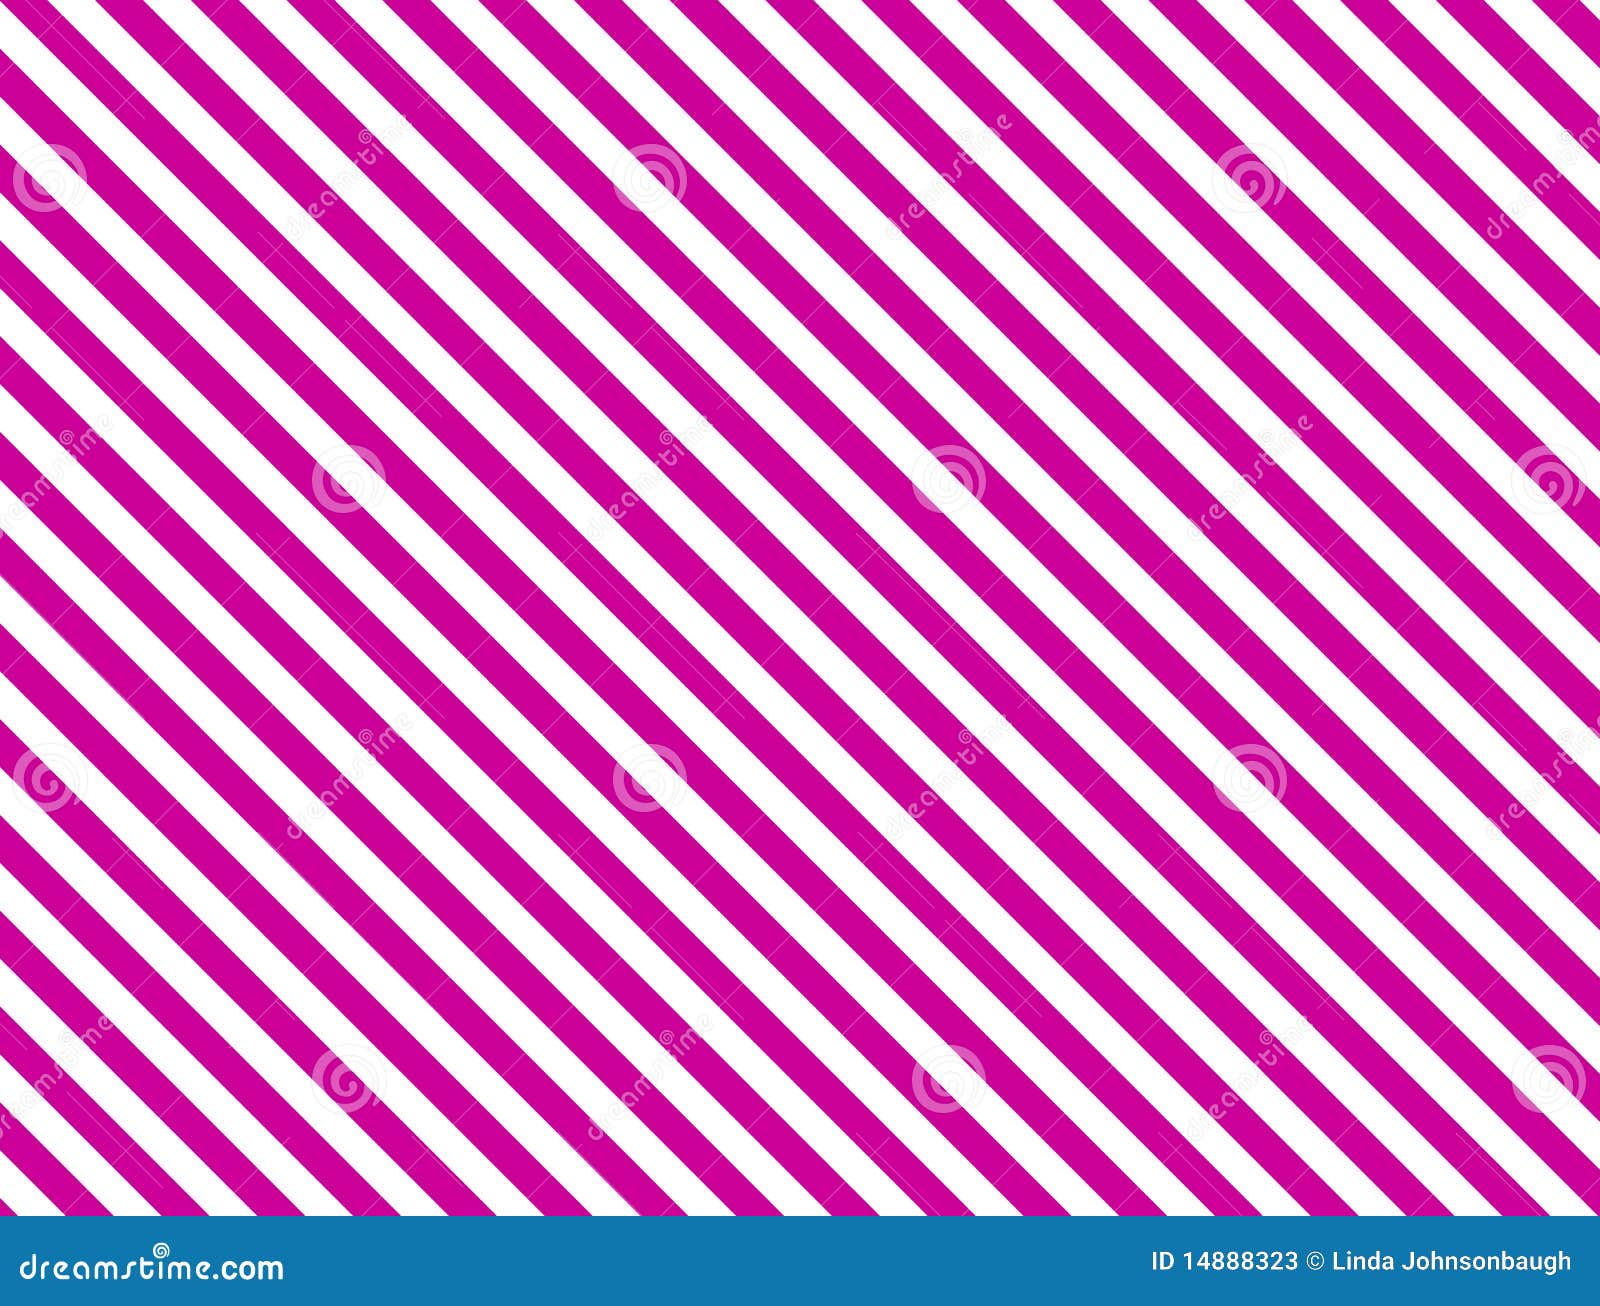 Vector EPS8 Diagonal Striped Background In Pink Stock Vector